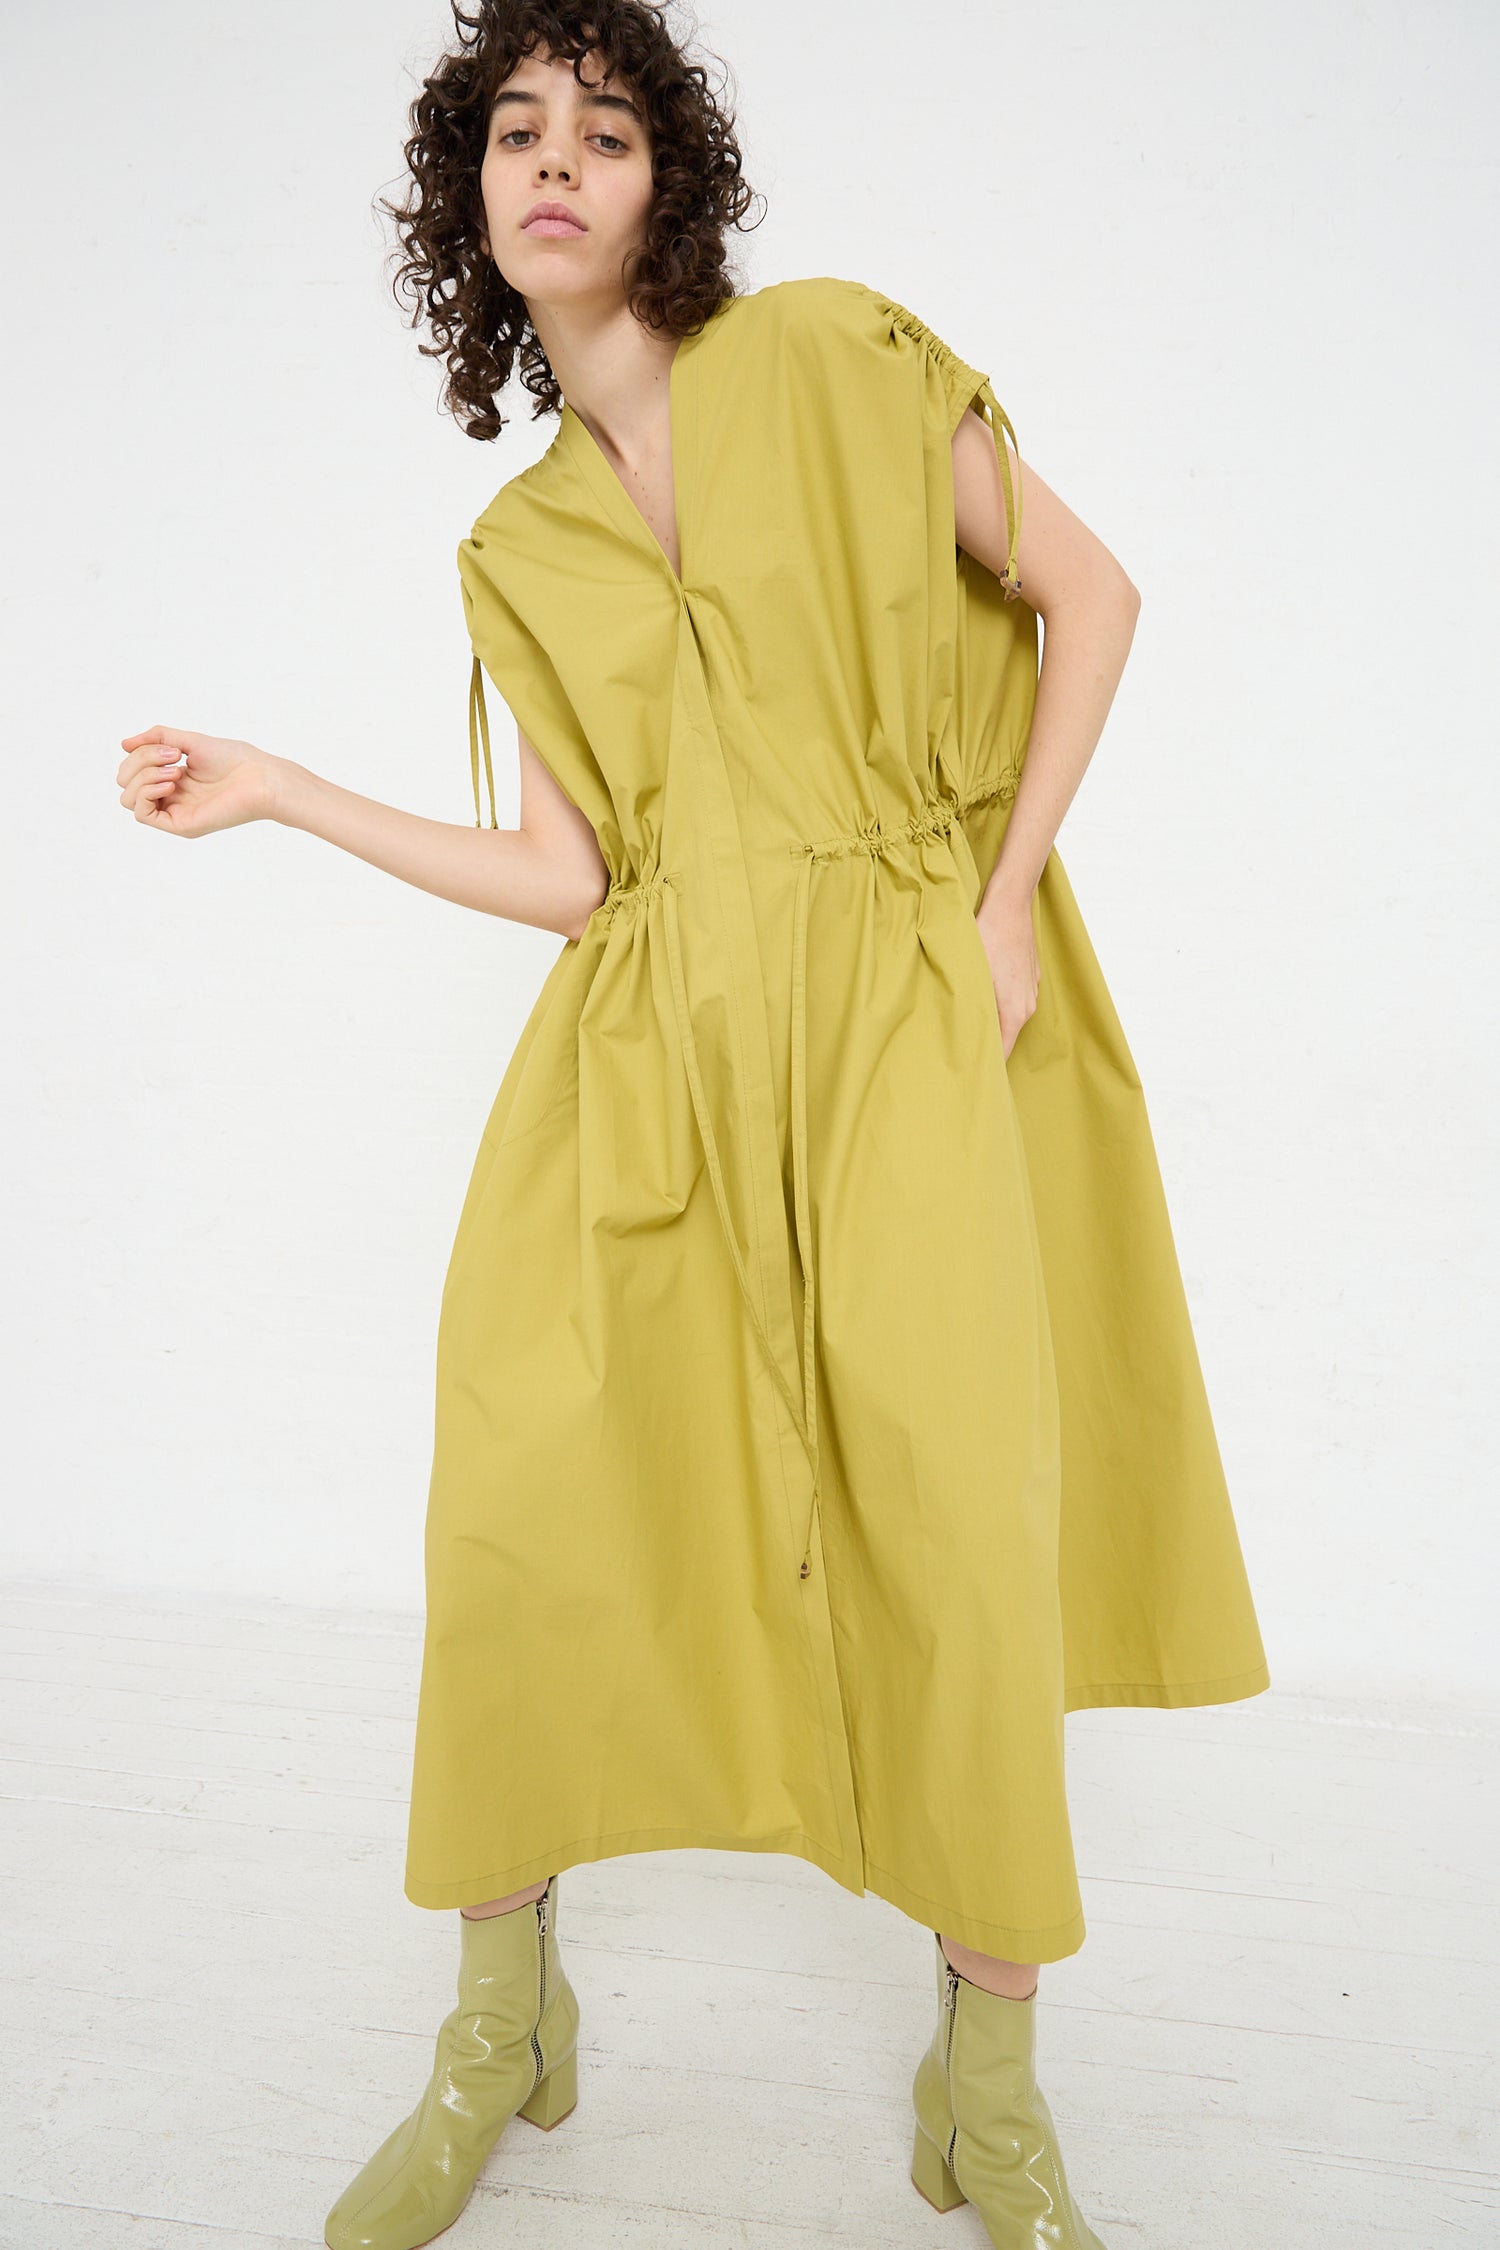 The model is wearing an oversized yellow Veronique Leroy Cotton Poplin Gathered Dress in Matcha and boots.